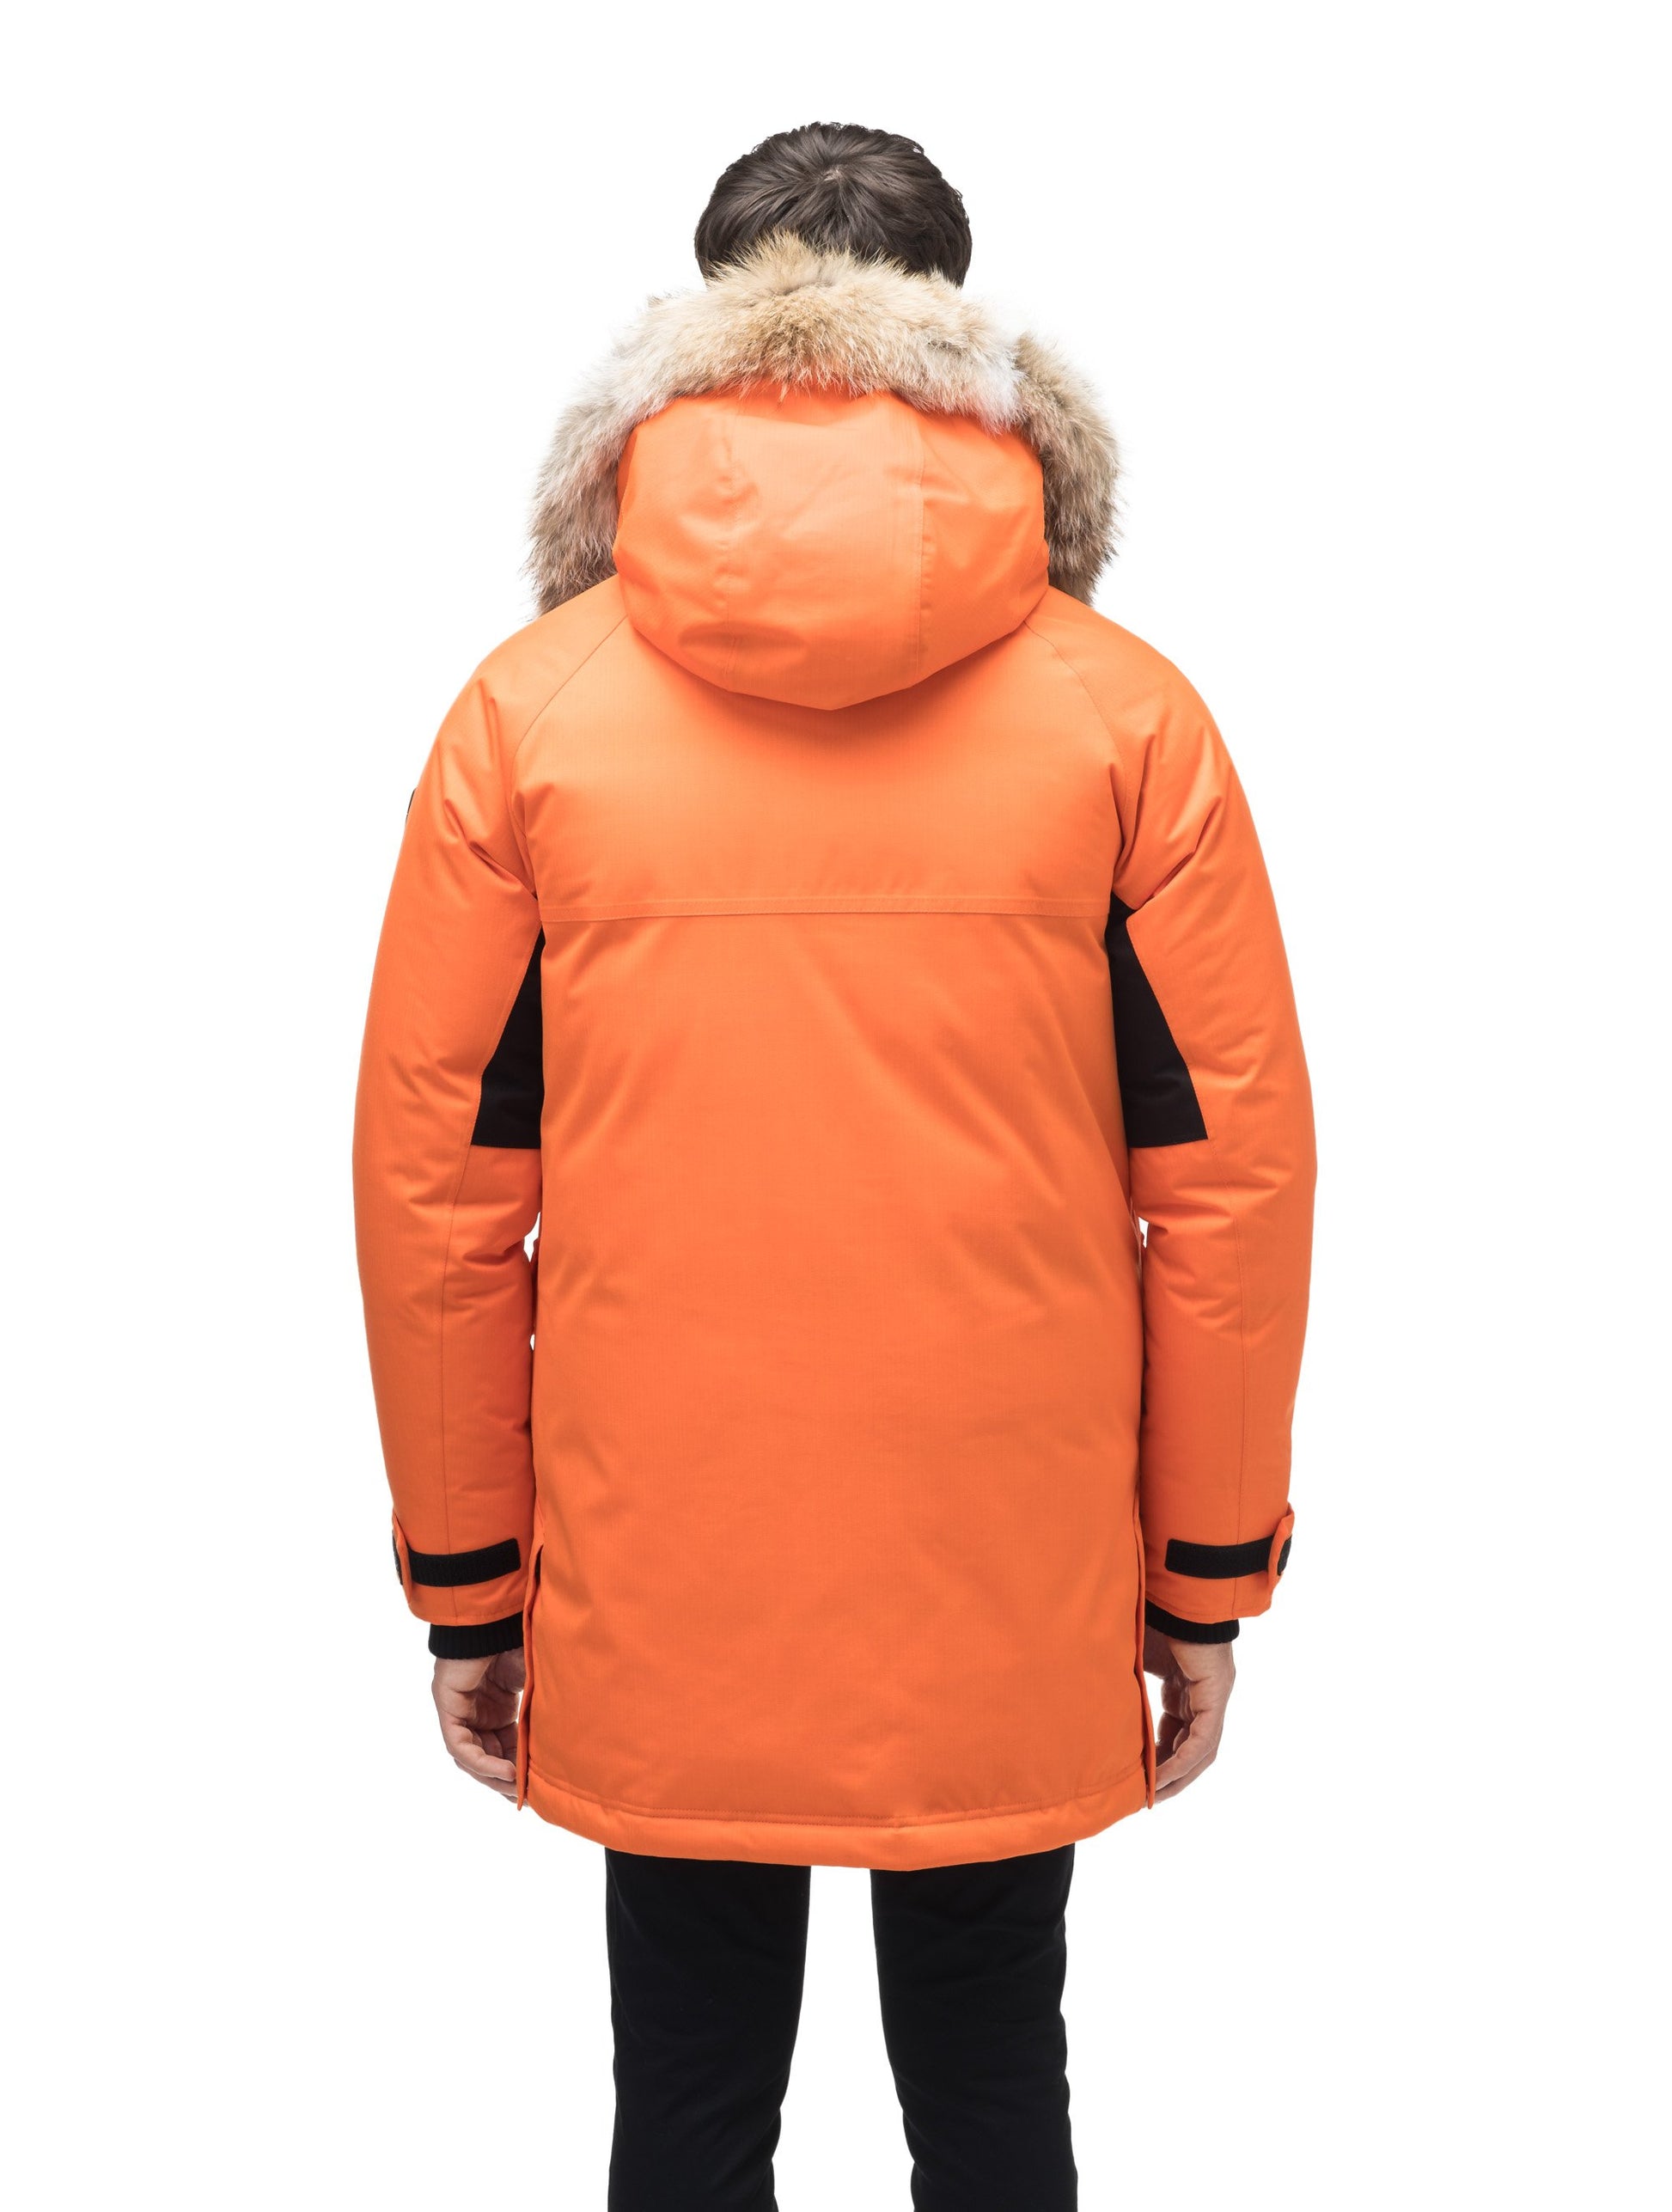 Men's thigh length down-filled parka with removable hood and removable coyote fur trim in Atomic